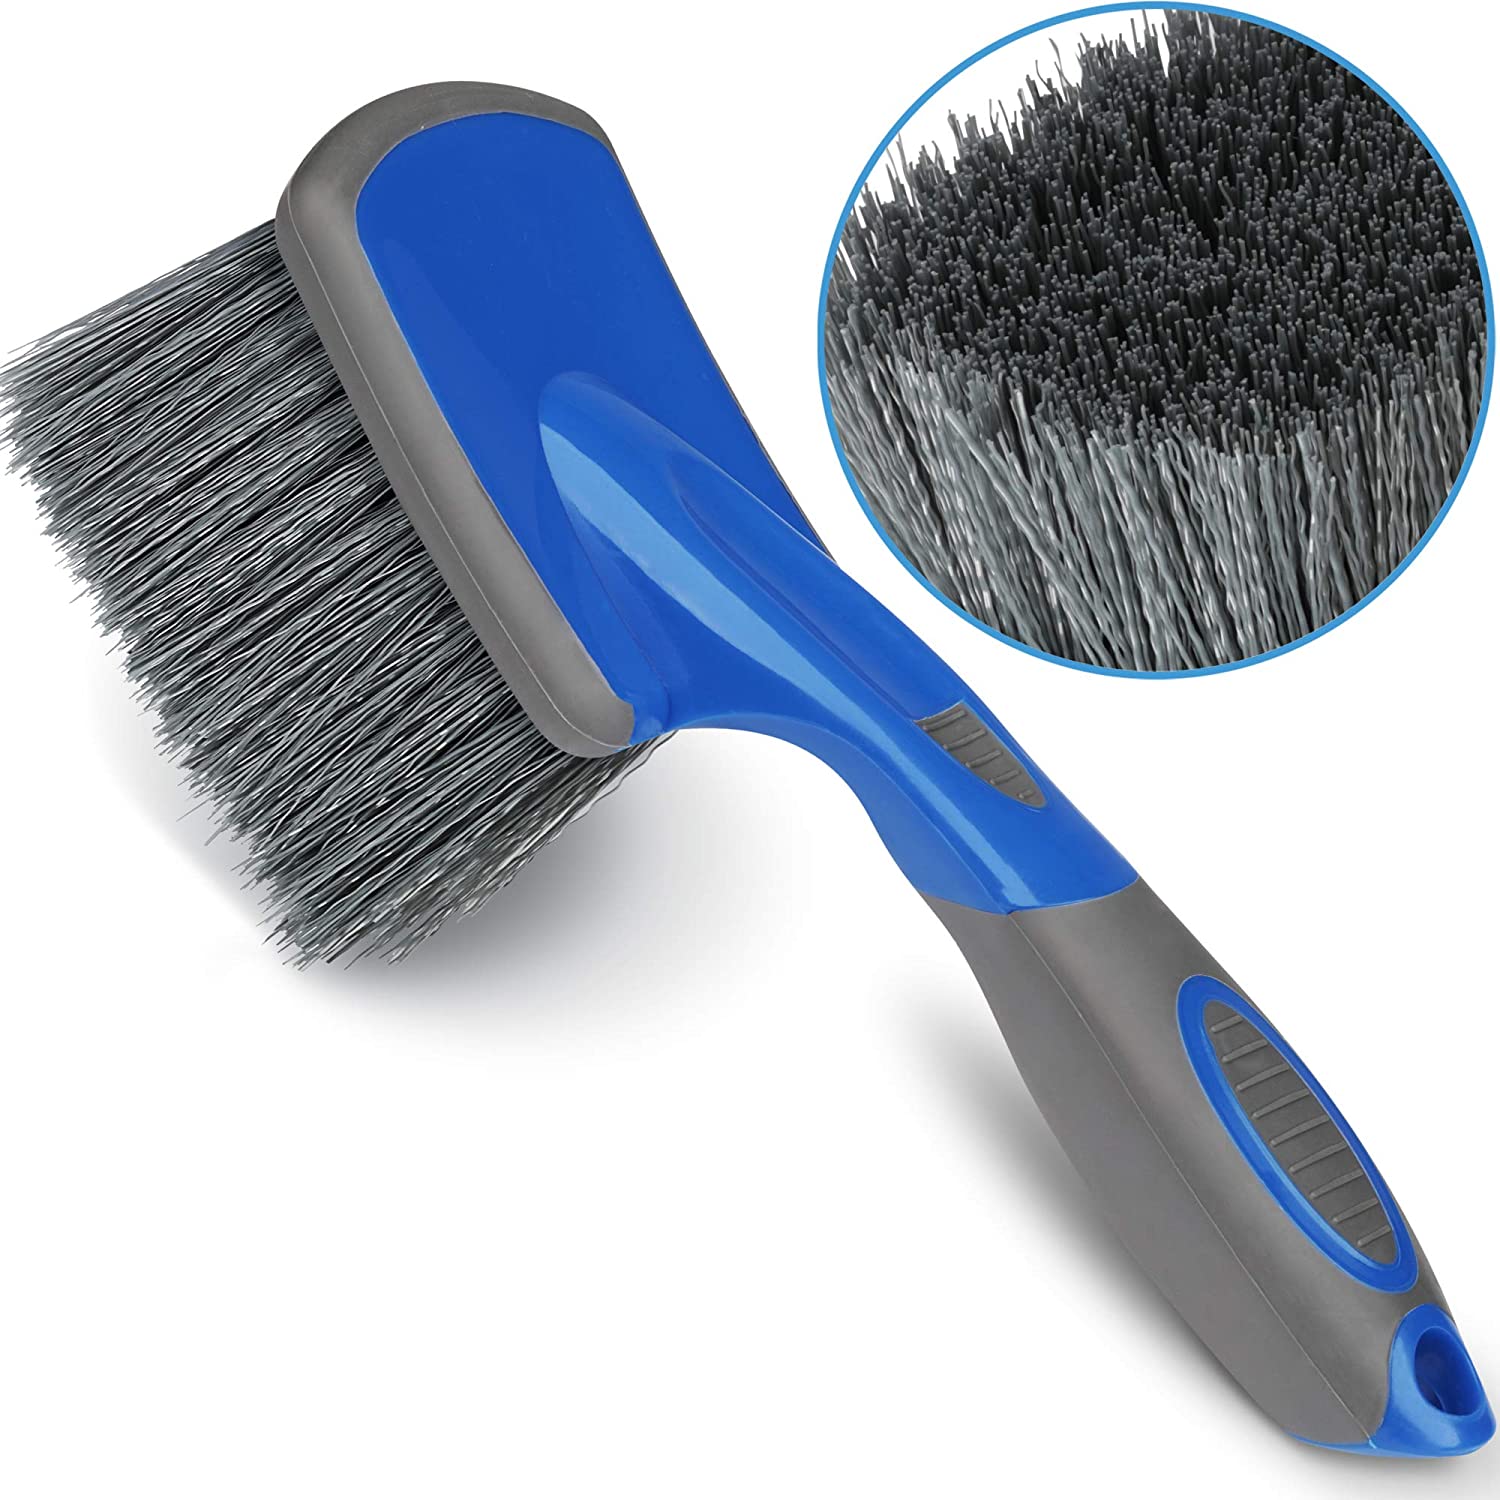 Detailing & Parts Cleaning Brushes